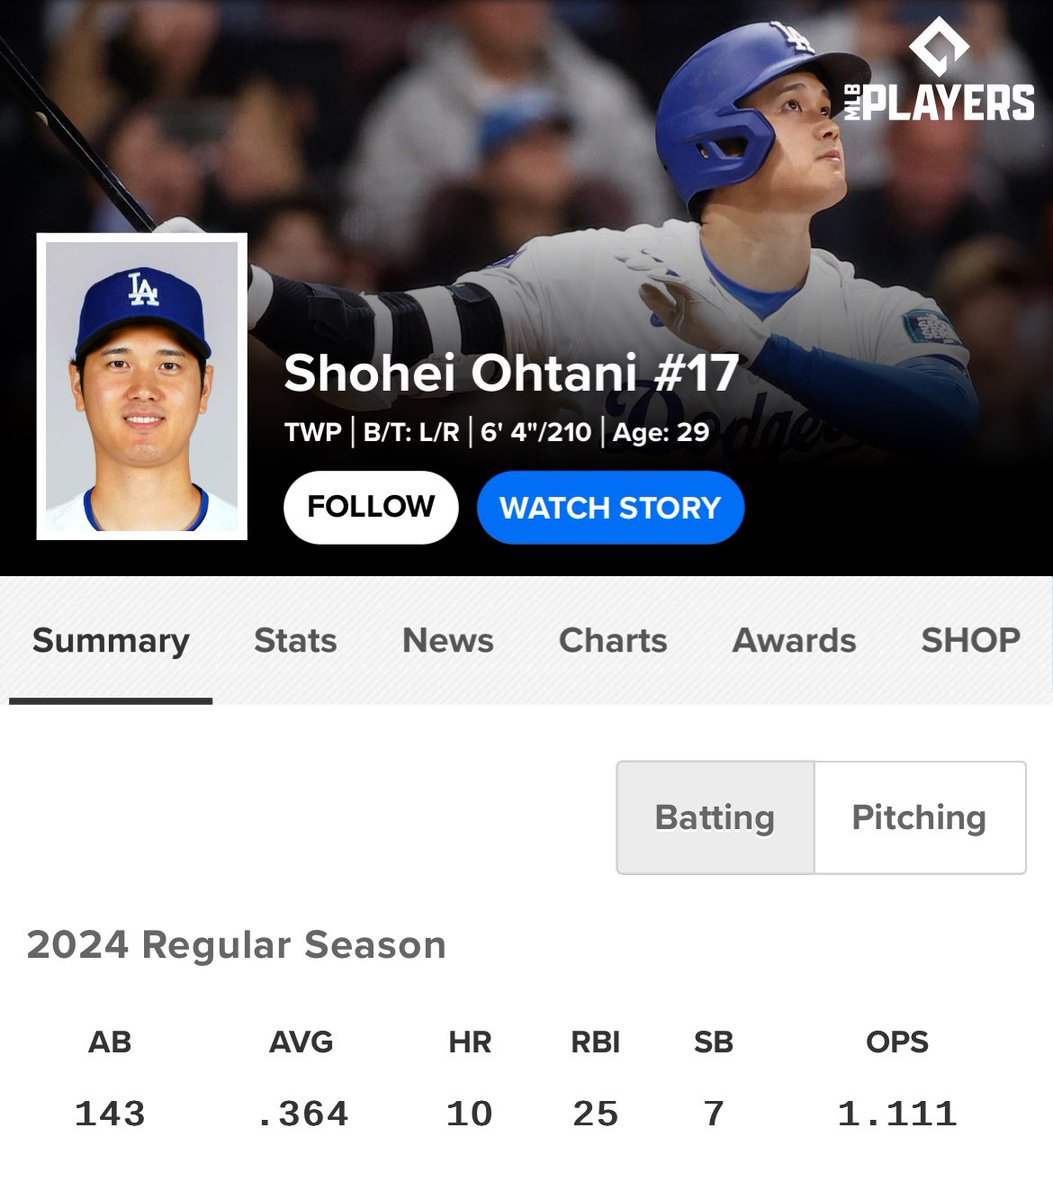 At what point is Shohei Ohtani just considered the best hitter in baseball